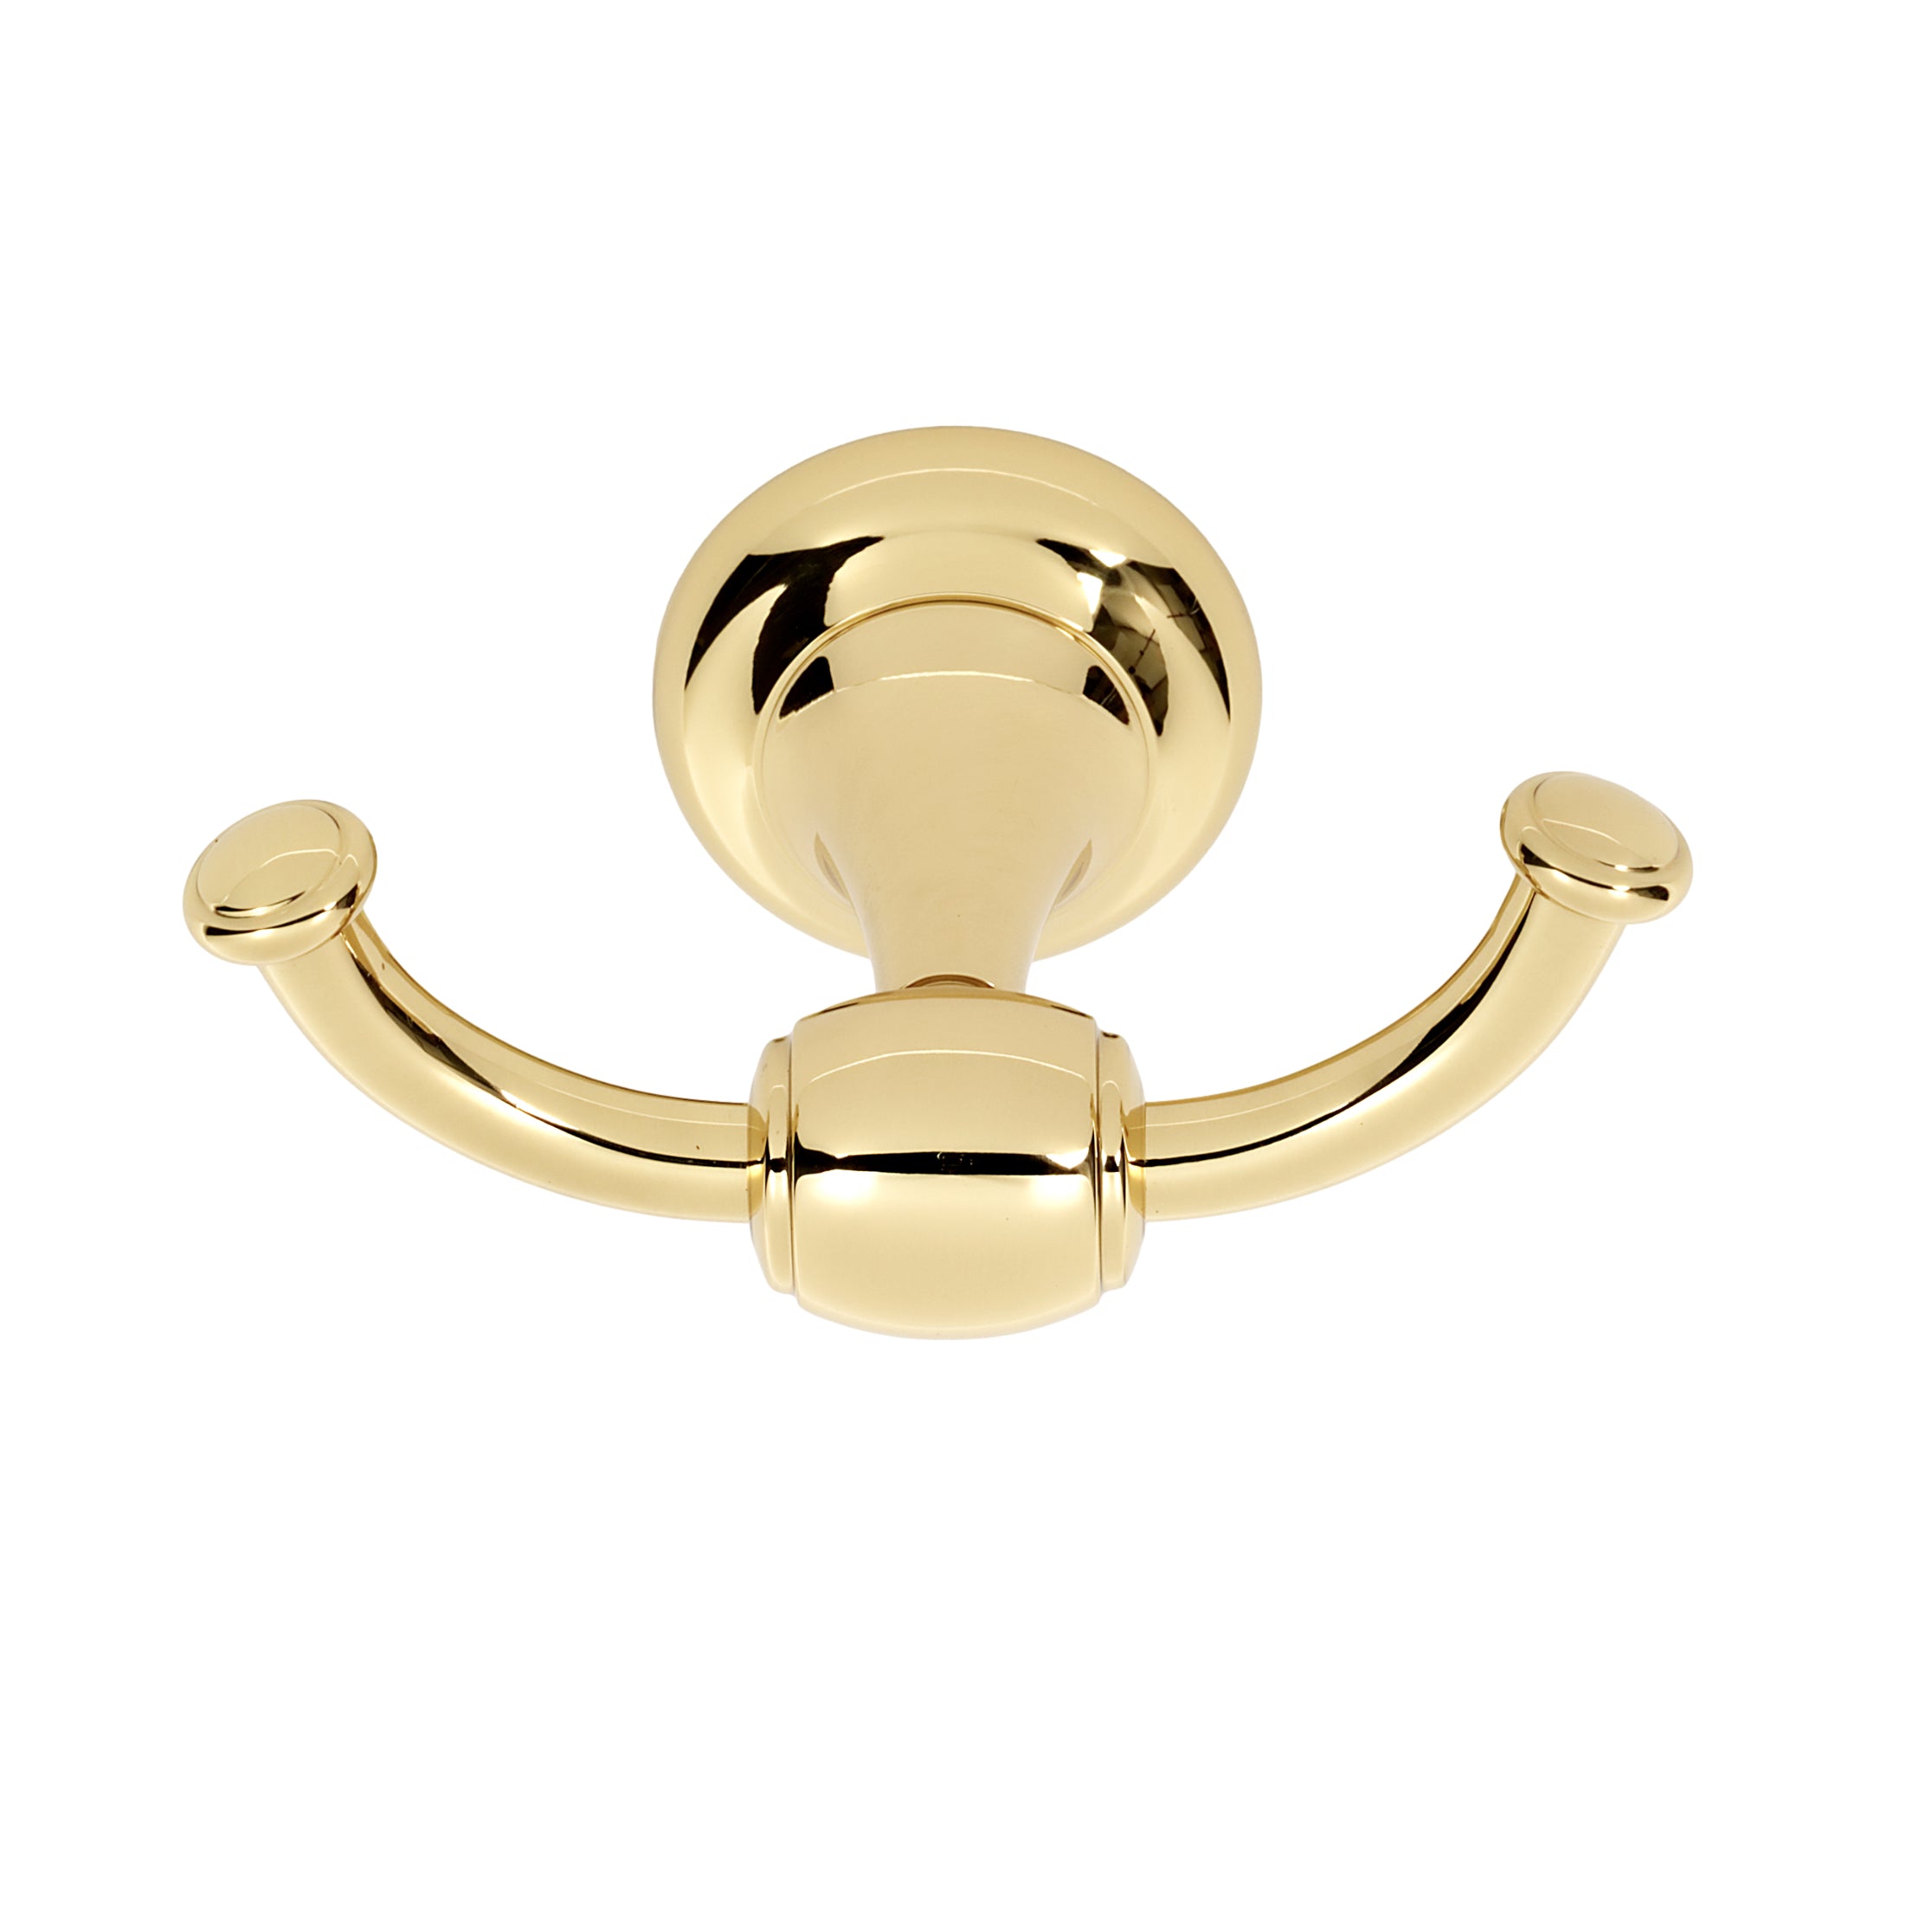 Polished Unlacquered Brass Royale Double Wall Coat Hook - Industry Hardware